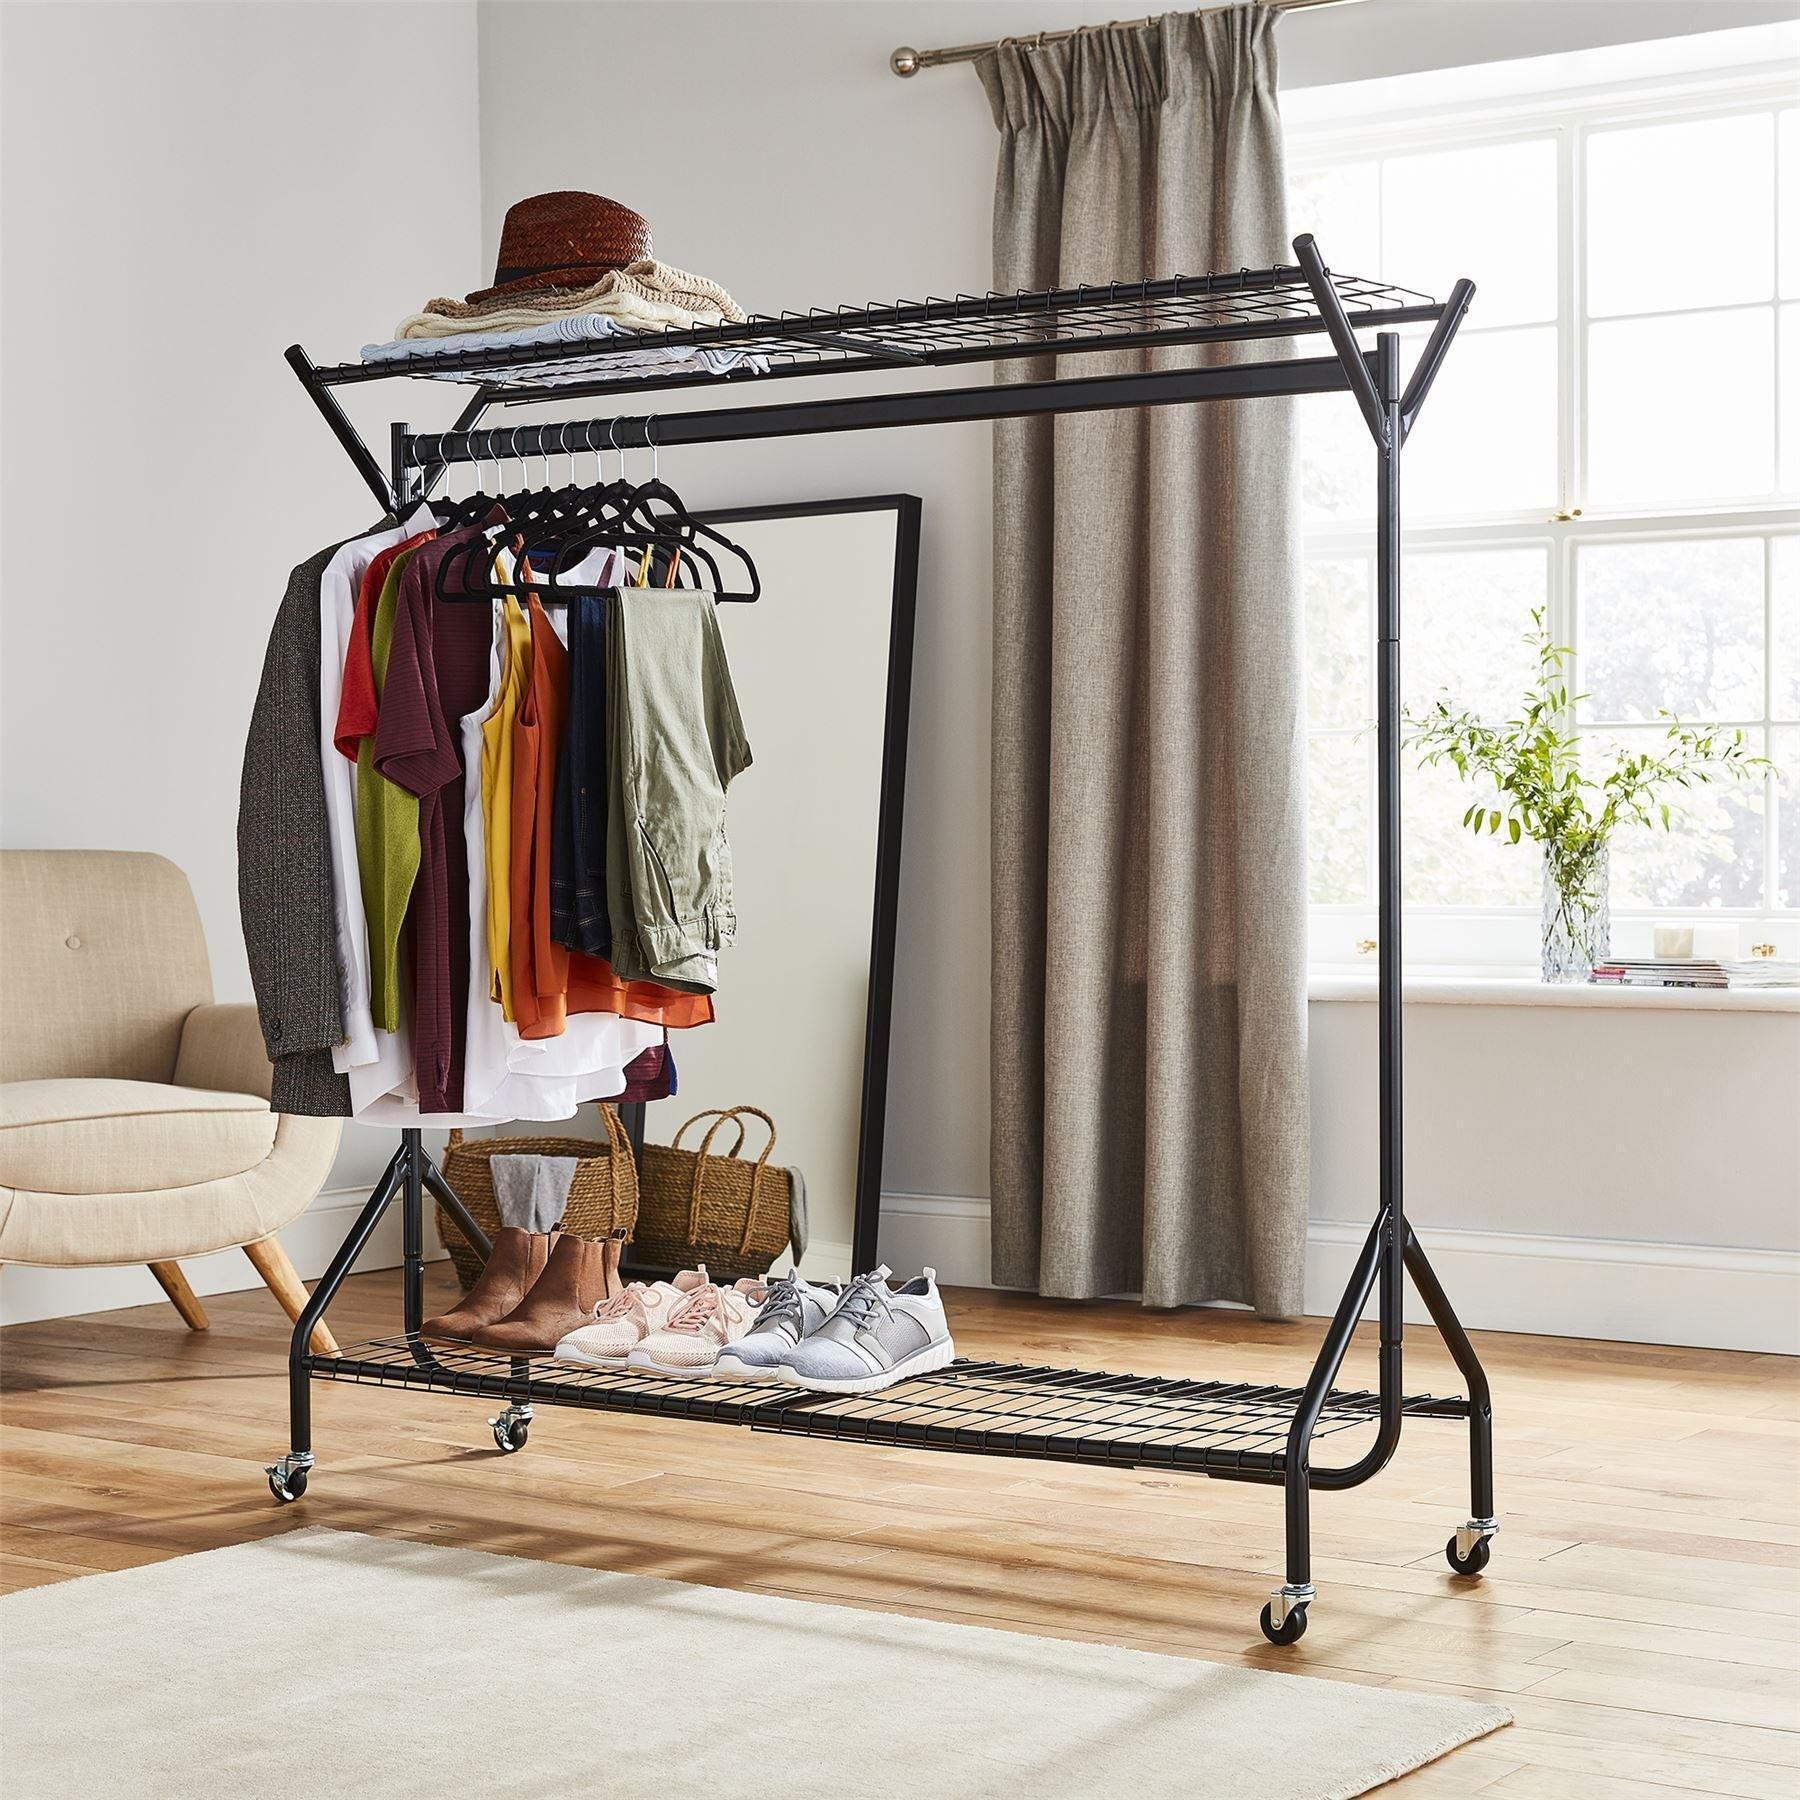 Clothing Rail Heavy Duty Hanging Clothes Shoe Hat Rack Shelves With Wheels 5ft x 5ft - image 1